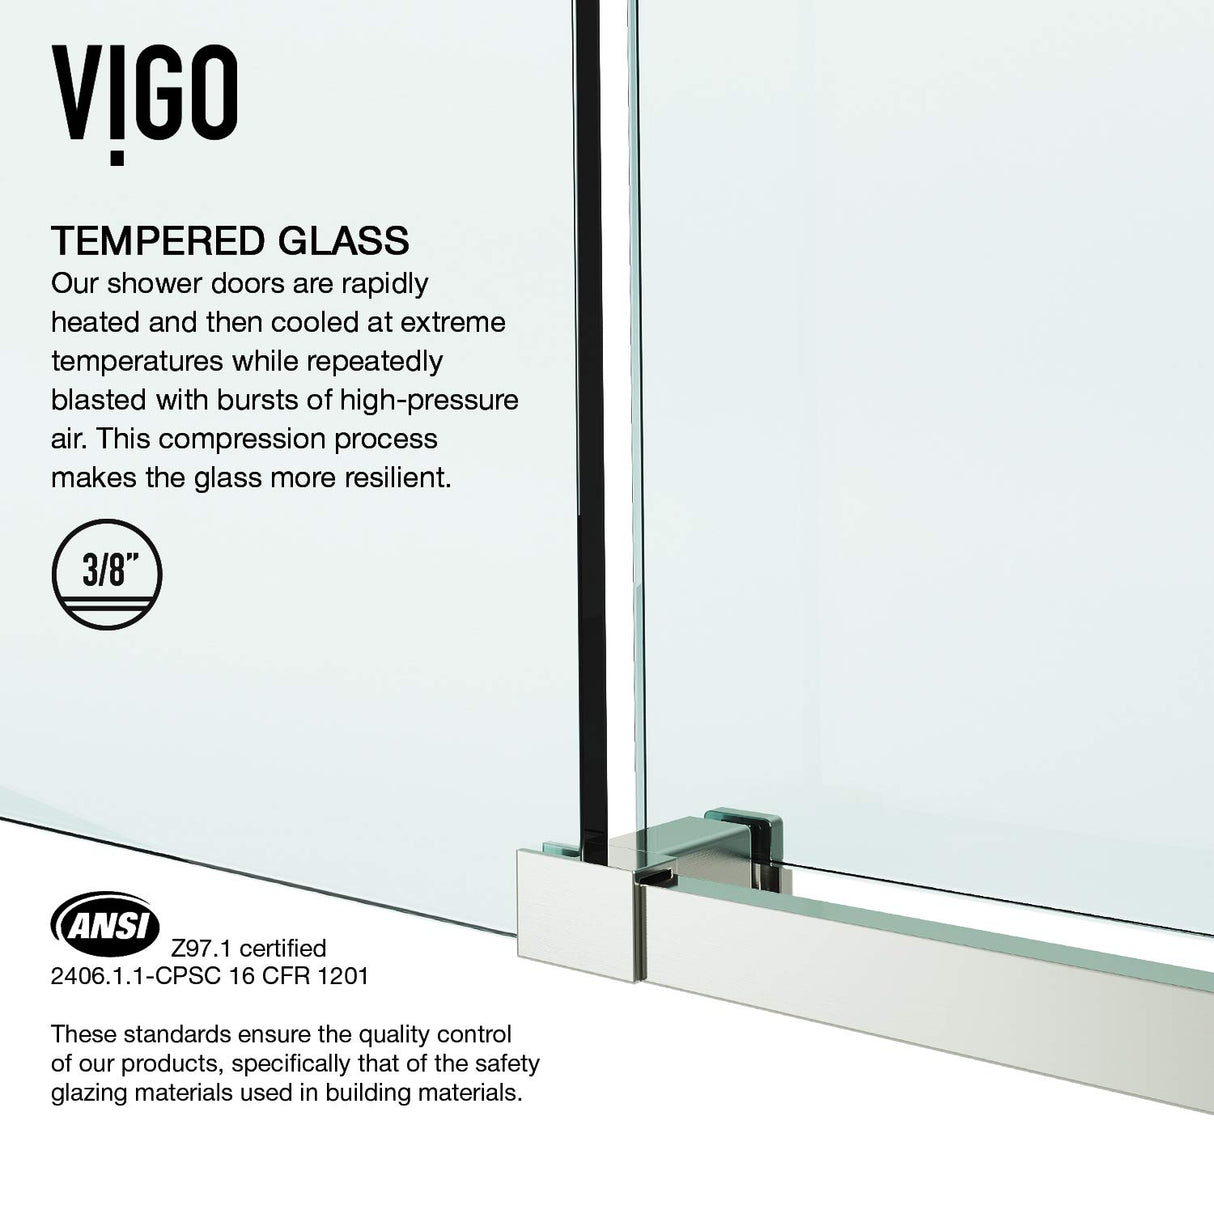 VIGO Adjustable 44-48" W x 76" H Elan E-Class Frameless Sliding Rectangle Shower Door with Clear Tempered Glass, Reversible Door Handle and Stainless Steel Hardware in Stainless Steel-VG6021STCL4876